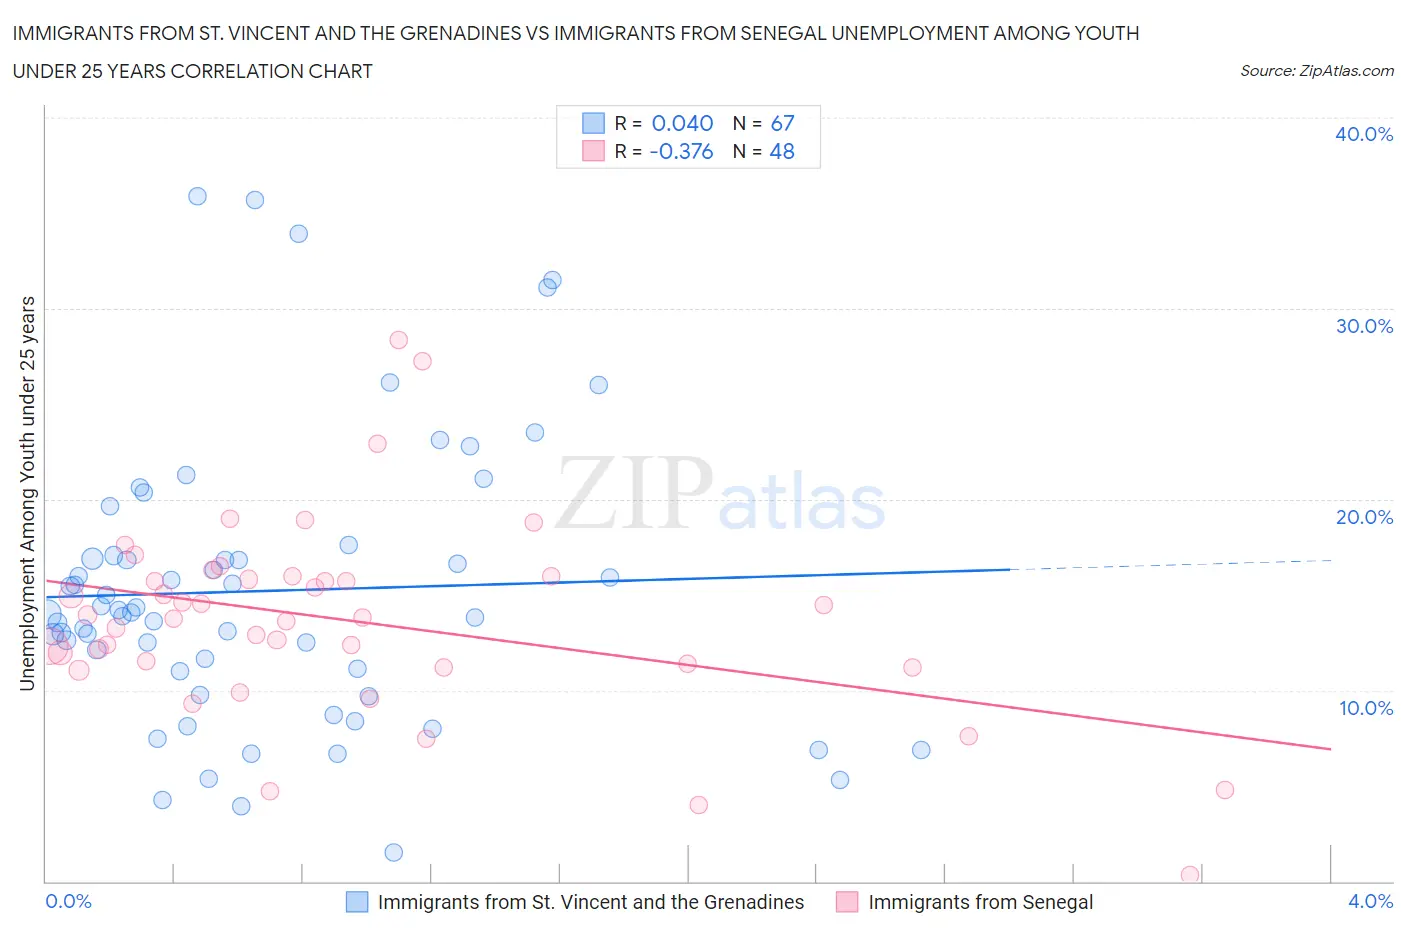 Immigrants from St. Vincent and the Grenadines vs Immigrants from Senegal Unemployment Among Youth under 25 years